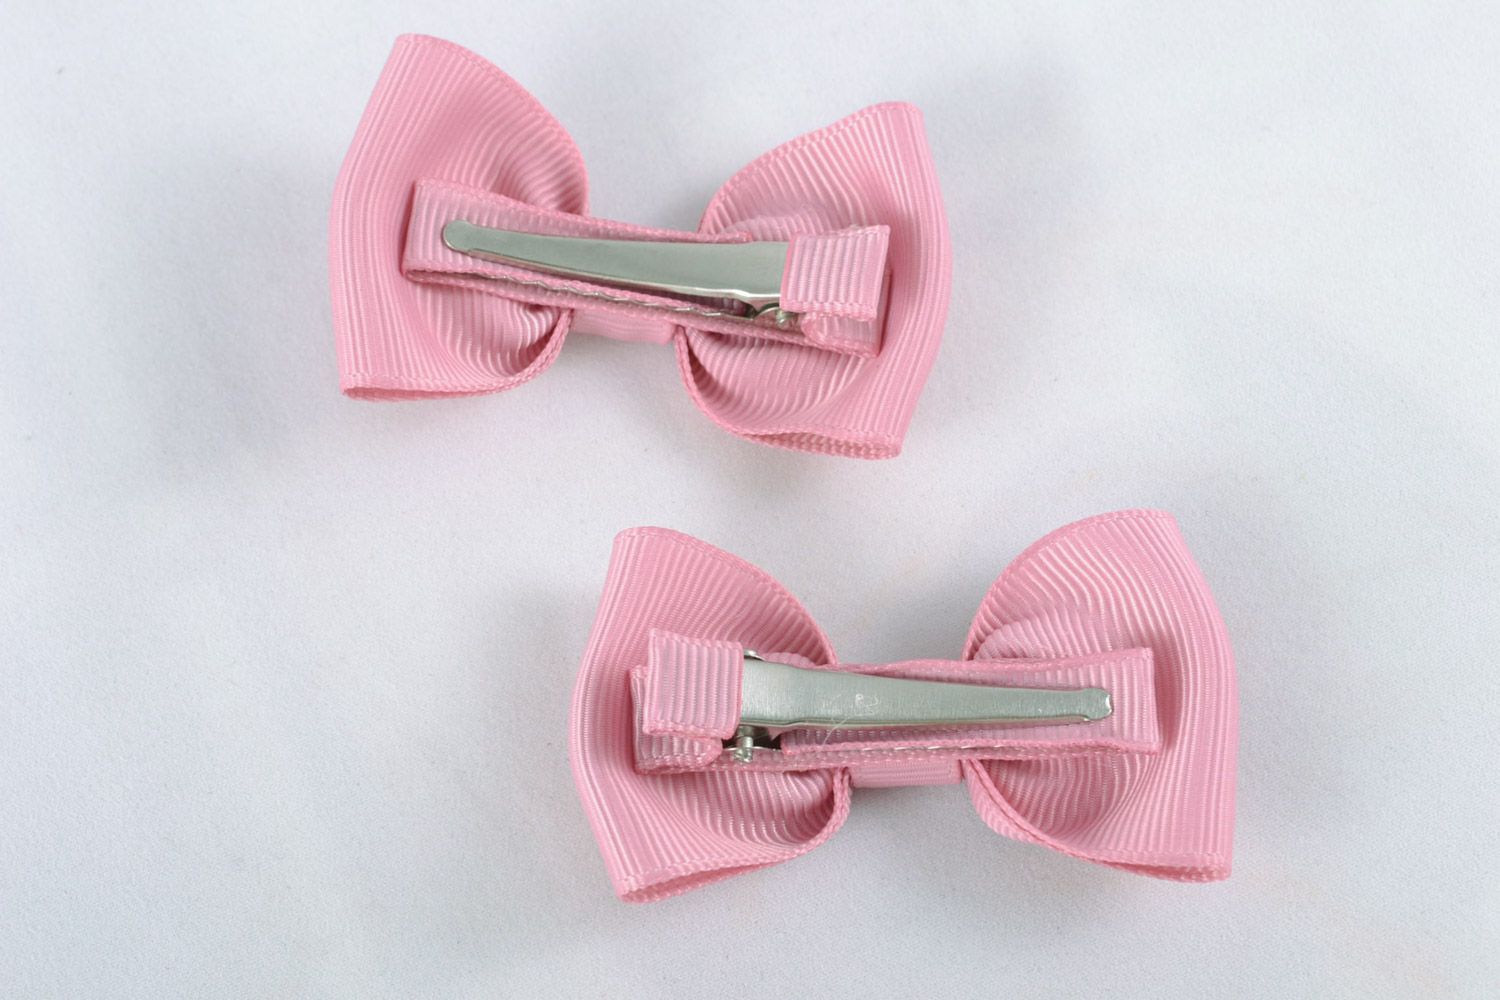 Handmade decorative hair clips with bows set of 2 pieces pink small hair accessories photo 5